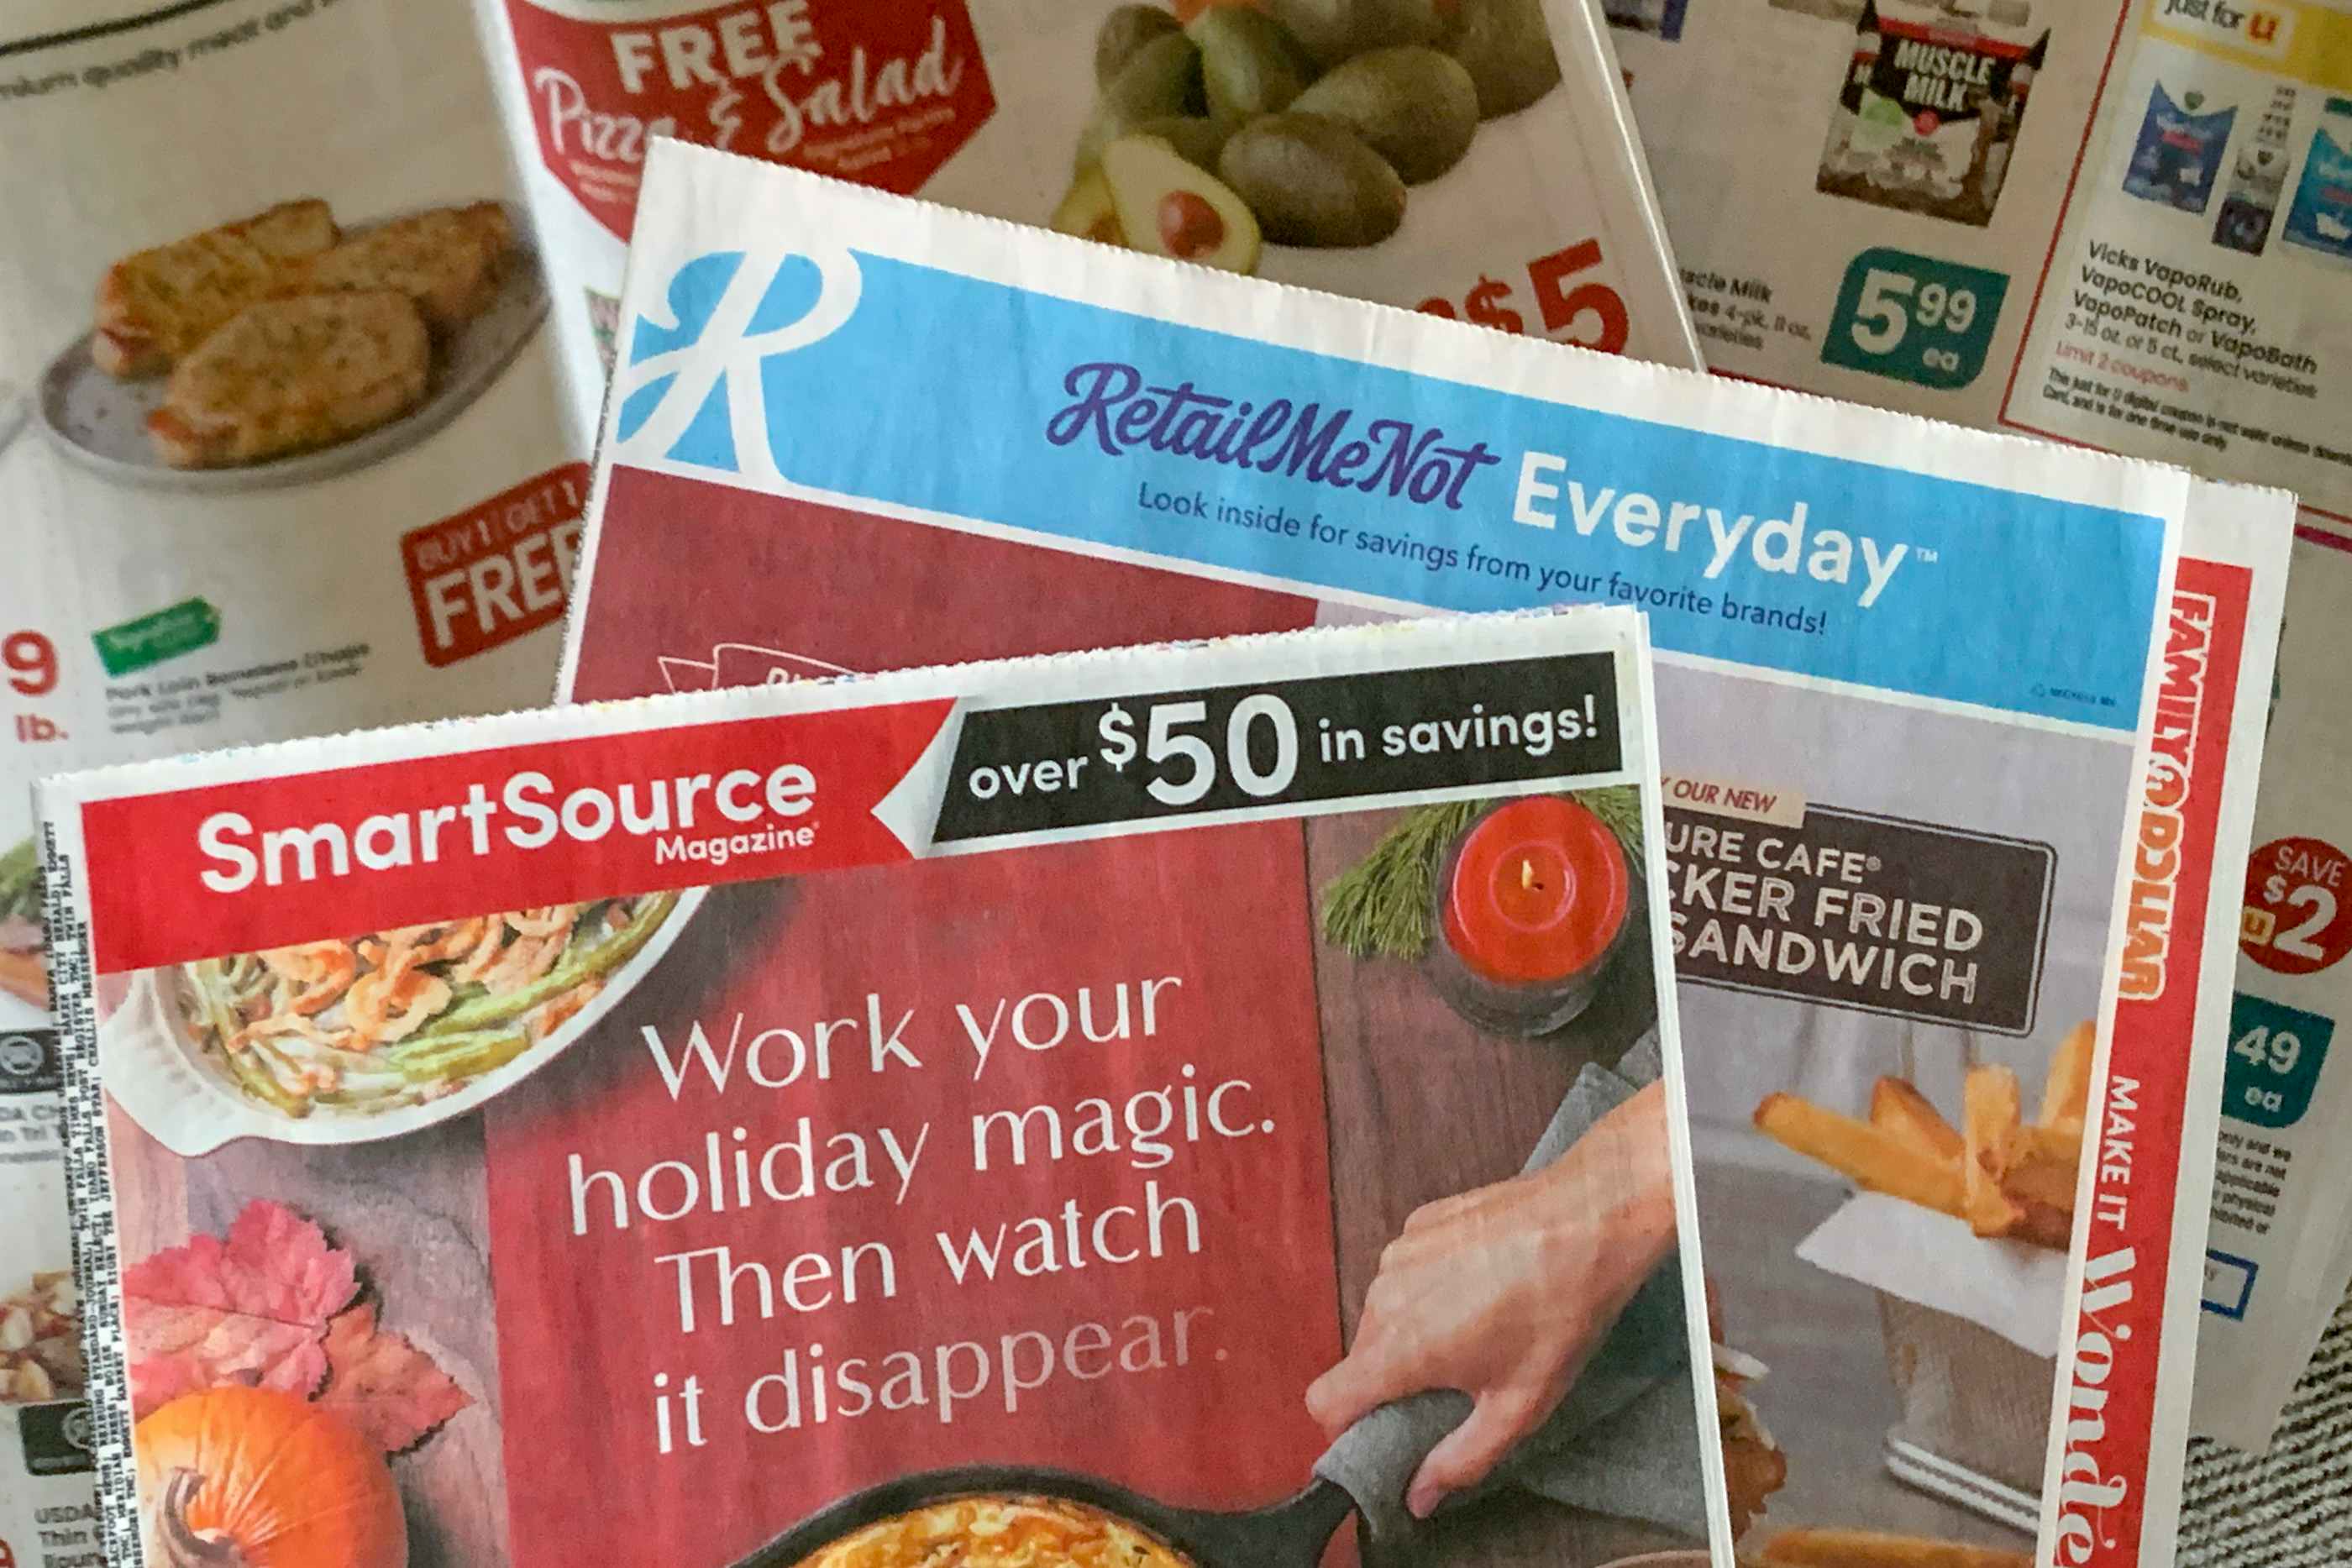 Smart source and retail-me-not newspaper inserts